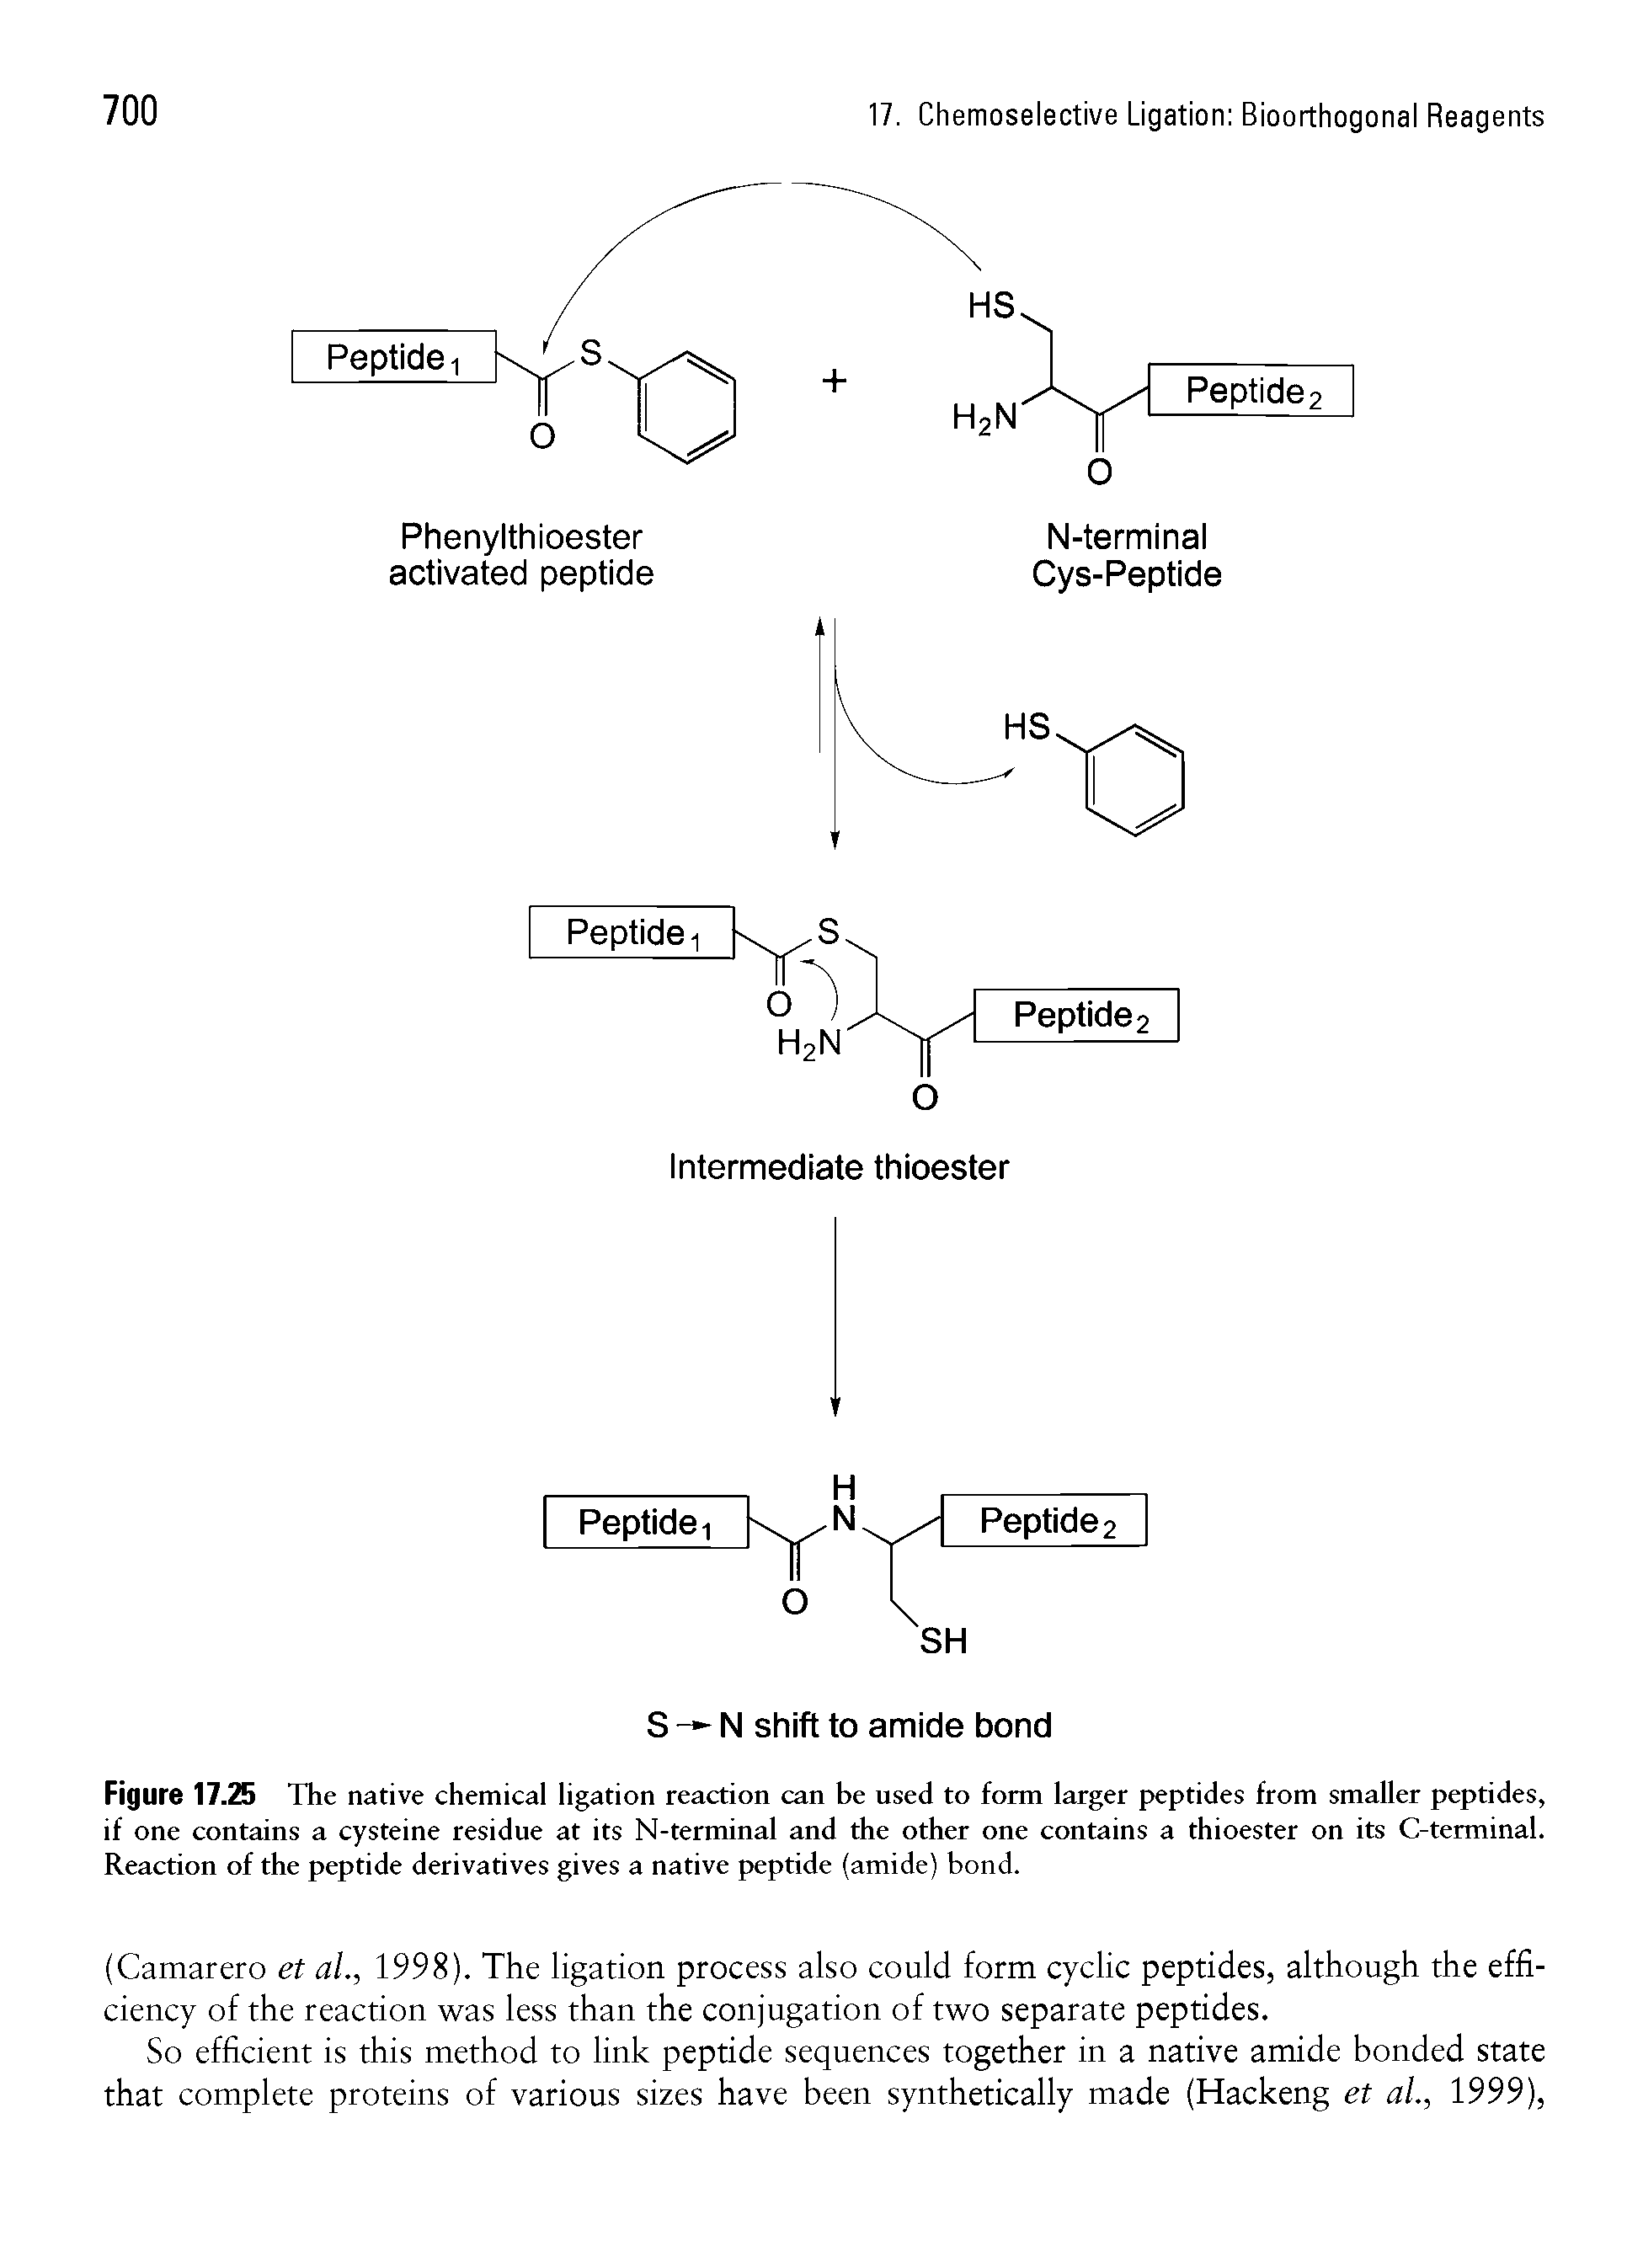 Figure 17.25 The native chemical ligation reaction can be used to form larger peptides from smaller peptides, if one contains a cysteine residue at its N-terminal and the other one contains a thioester on its C-terminal. Reaction of the peptide derivatives gives a native peptide (amide) bond.